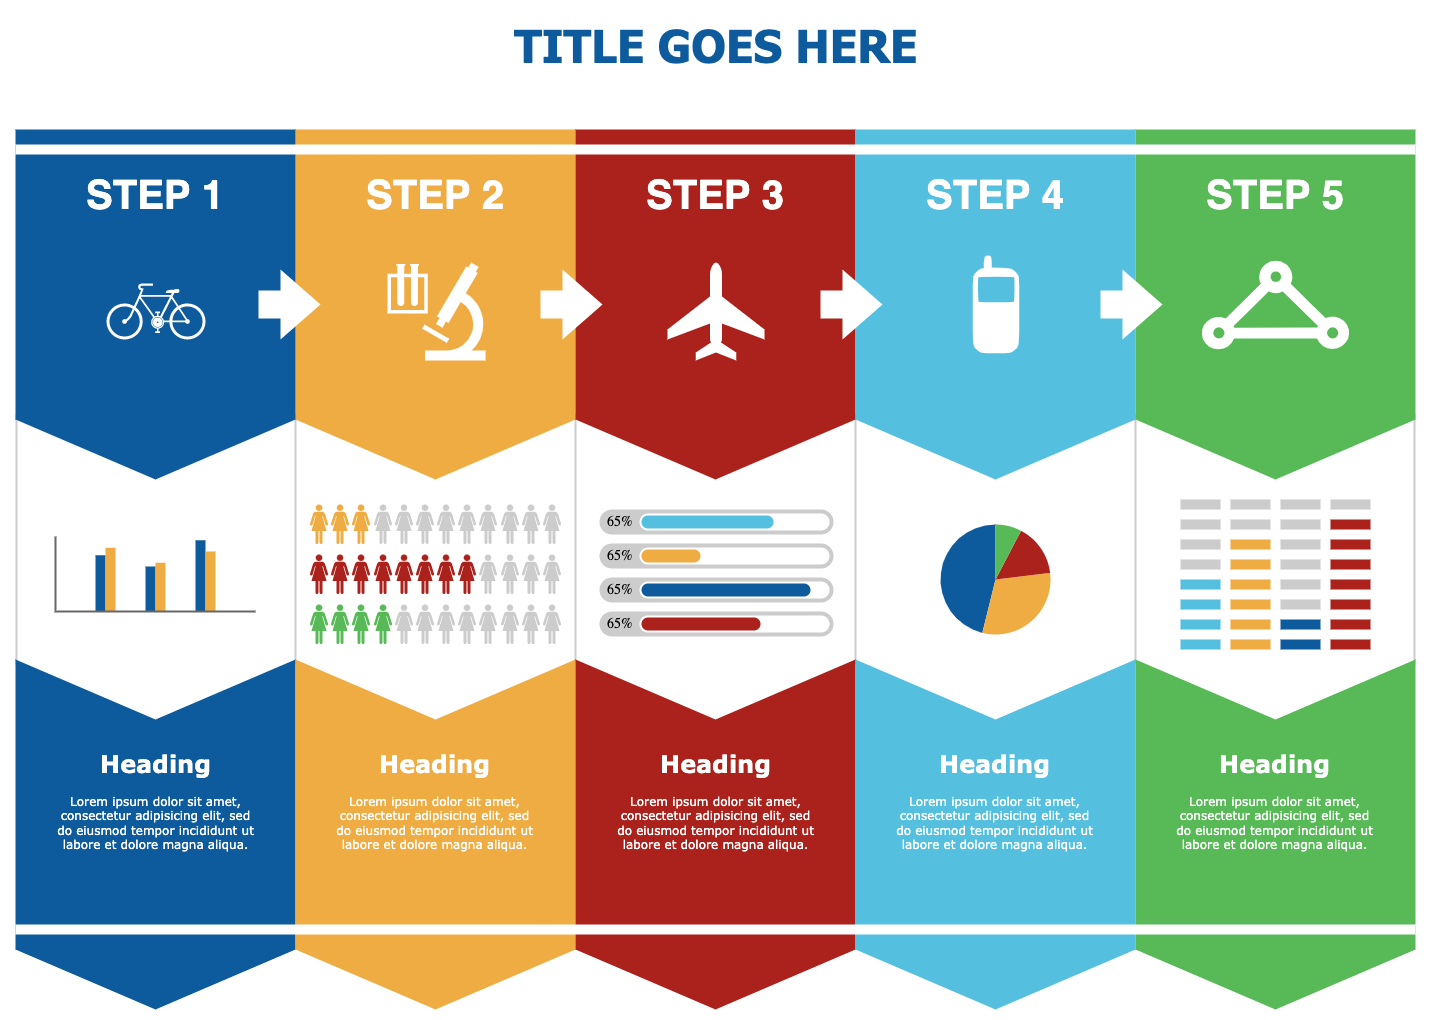 You can create attractive infographics in diagrams.net